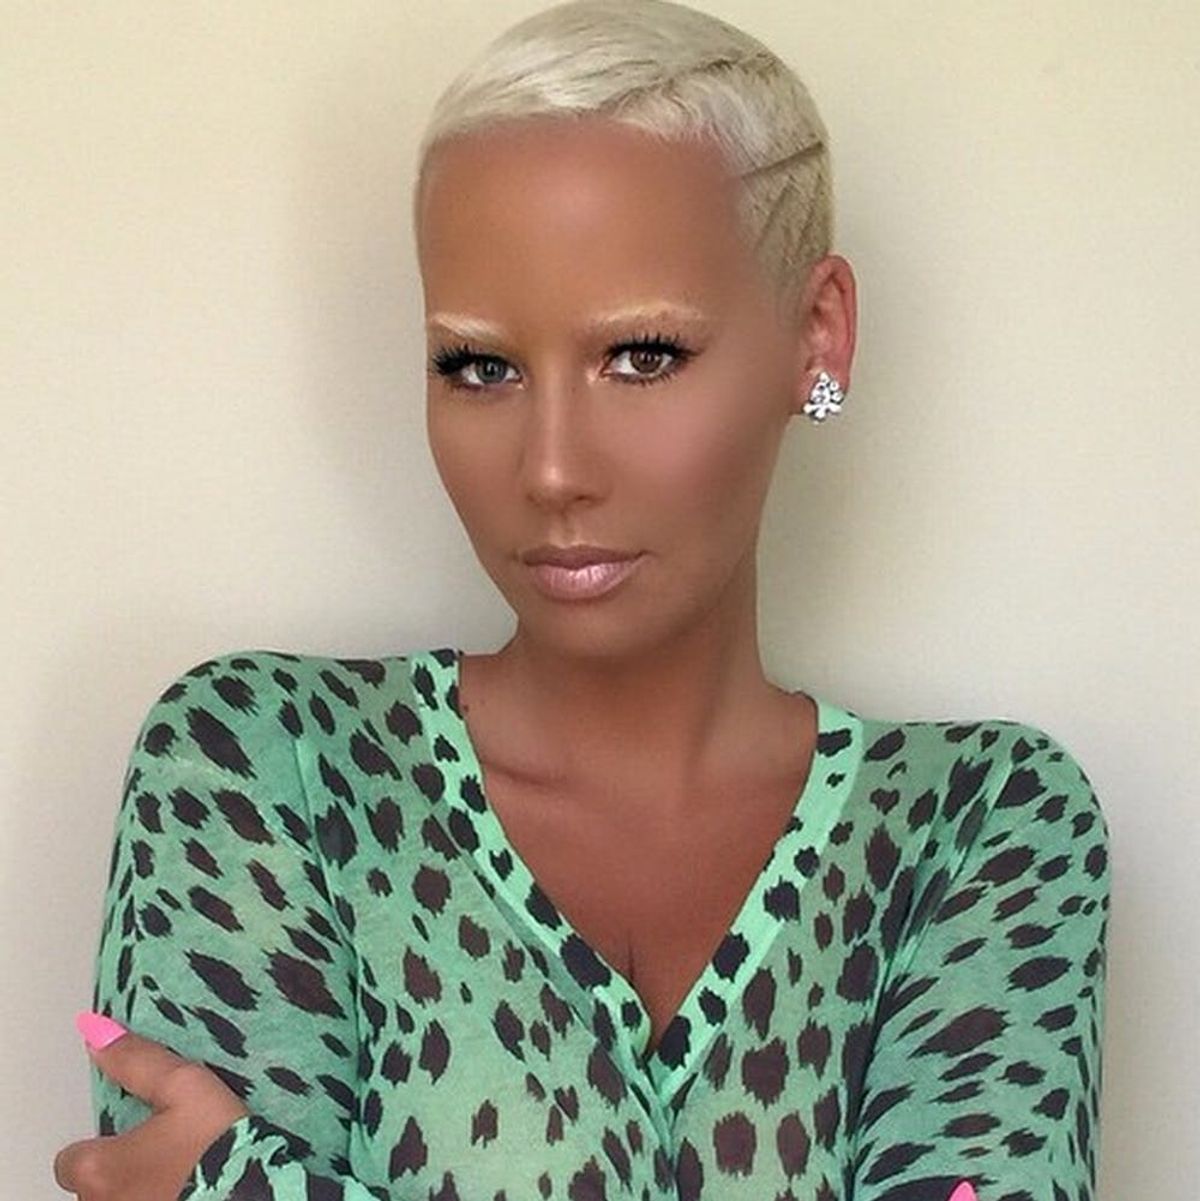 Amber Rose Will Make You Want to Try This New Eyebrow Trend